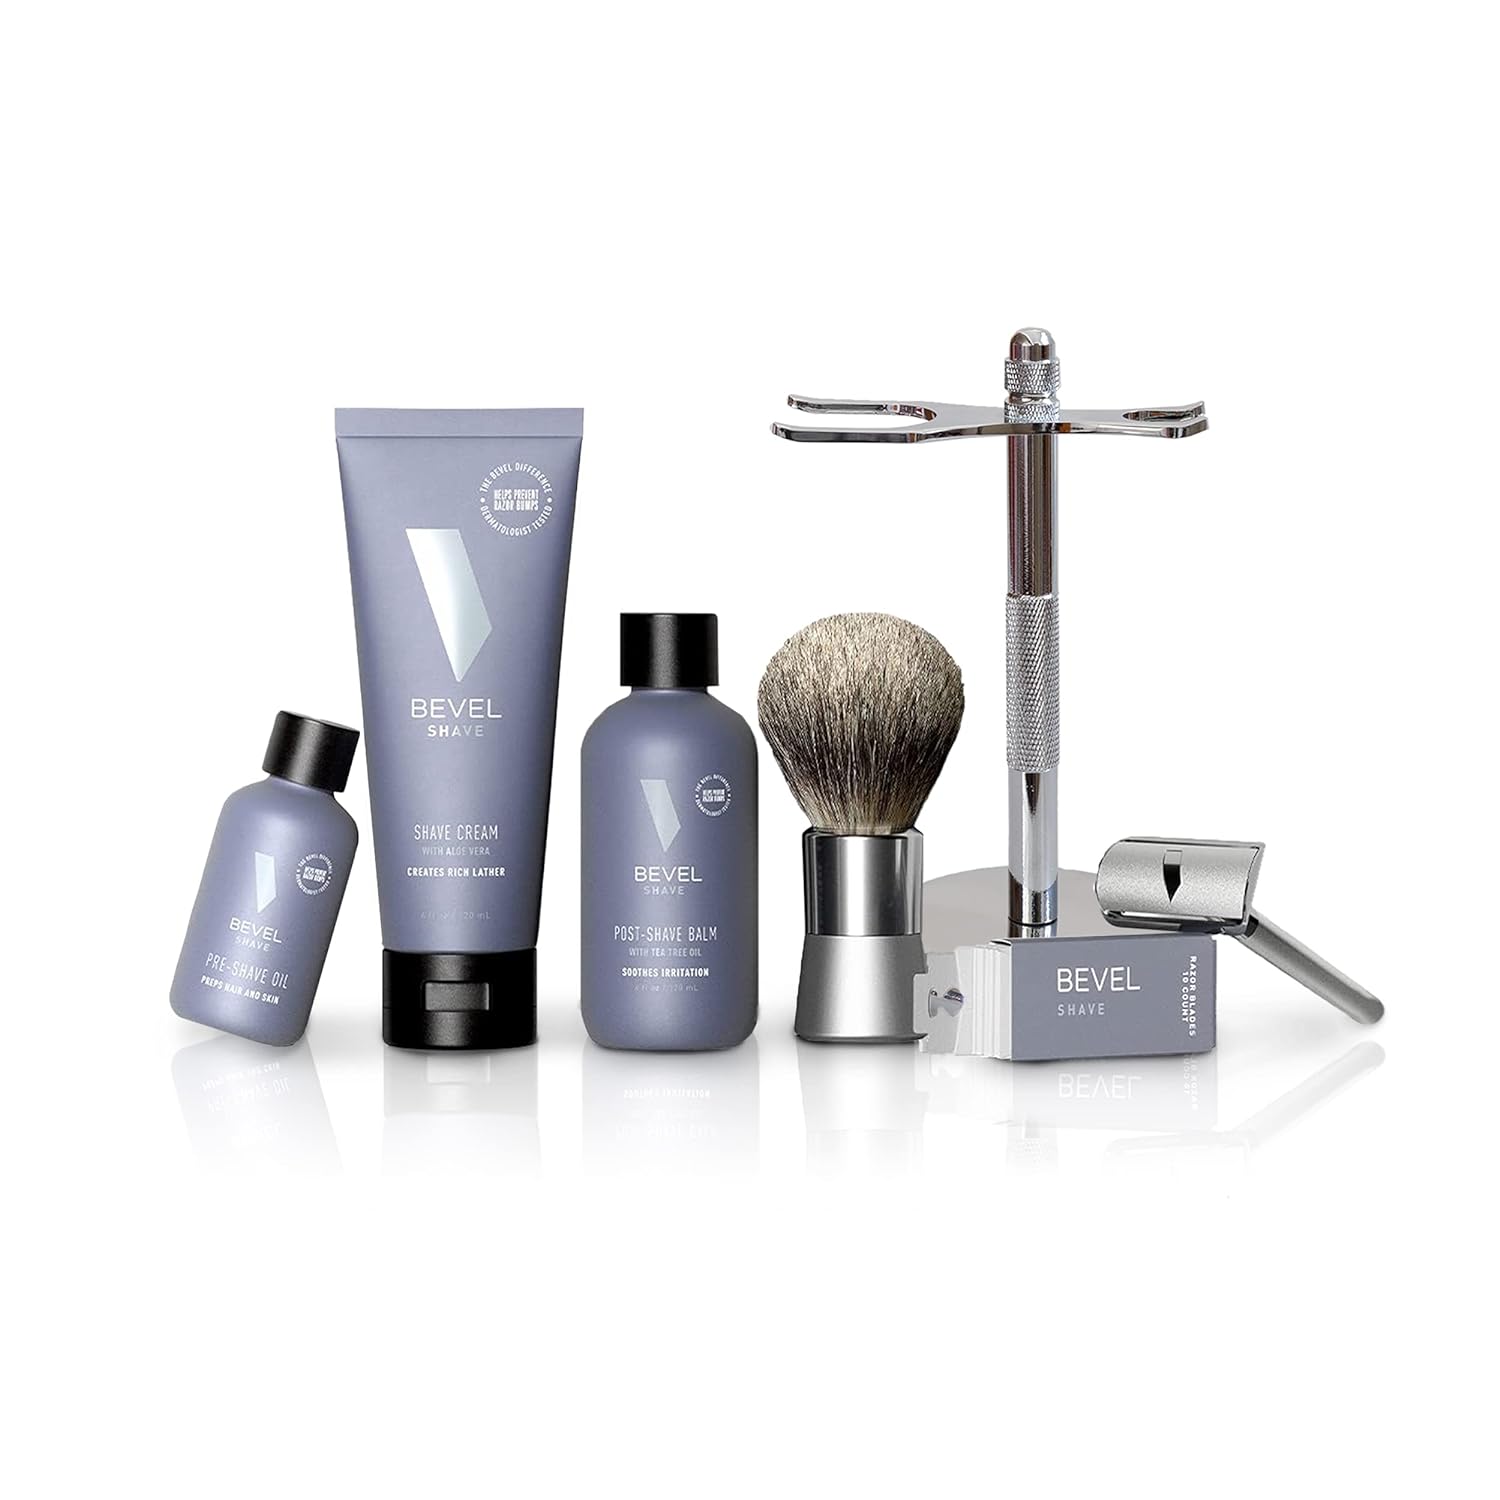 Shaving Kit for Men with Shaving Brush & Safety Razor Stand by Bevel - Starter Shave Kit, Includes Safety Razor, Shaving Brush, Shave Stand, Shave Cream, Pre Shave Oil, Balm and 20 Blades